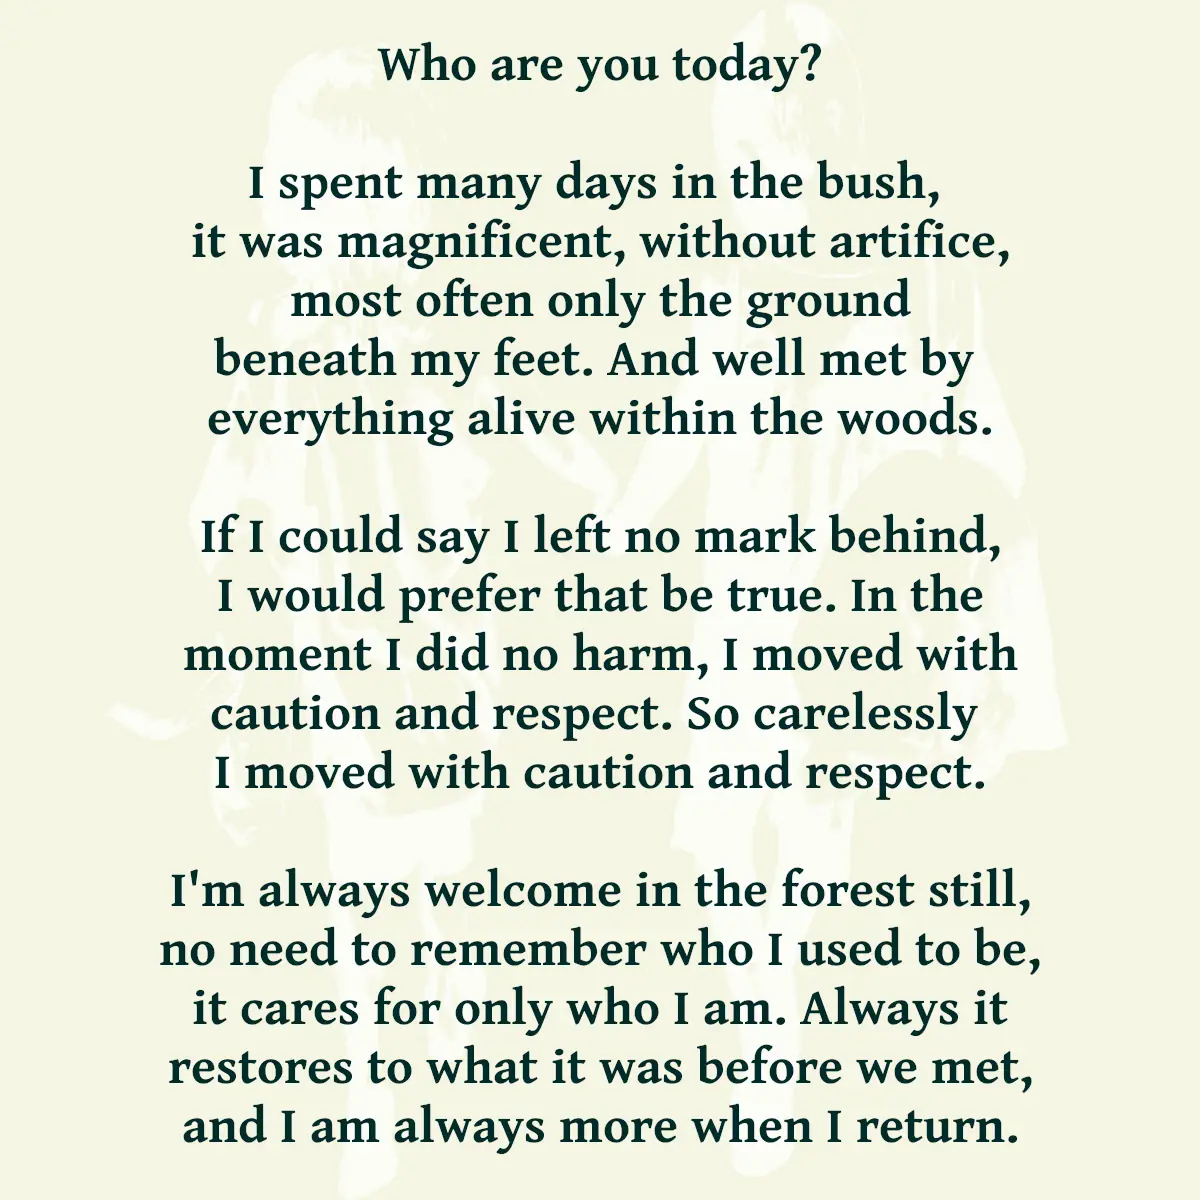 Who are you today? I spent many days in the bush, it was magnificent, without artifice, most often only the ground beneath my feet. And well met by everything alive within the woods. If I could say I left no mark behind, I would prefer that be true. In the moment I did no harm, I moved with caution and respect. So carelessly I moved with caution and respect. I'm always welcome in the forest still, no need to remember who I used to be, it cares for only who I am. Always it restores to what it was before we met, and I am always more when I return.